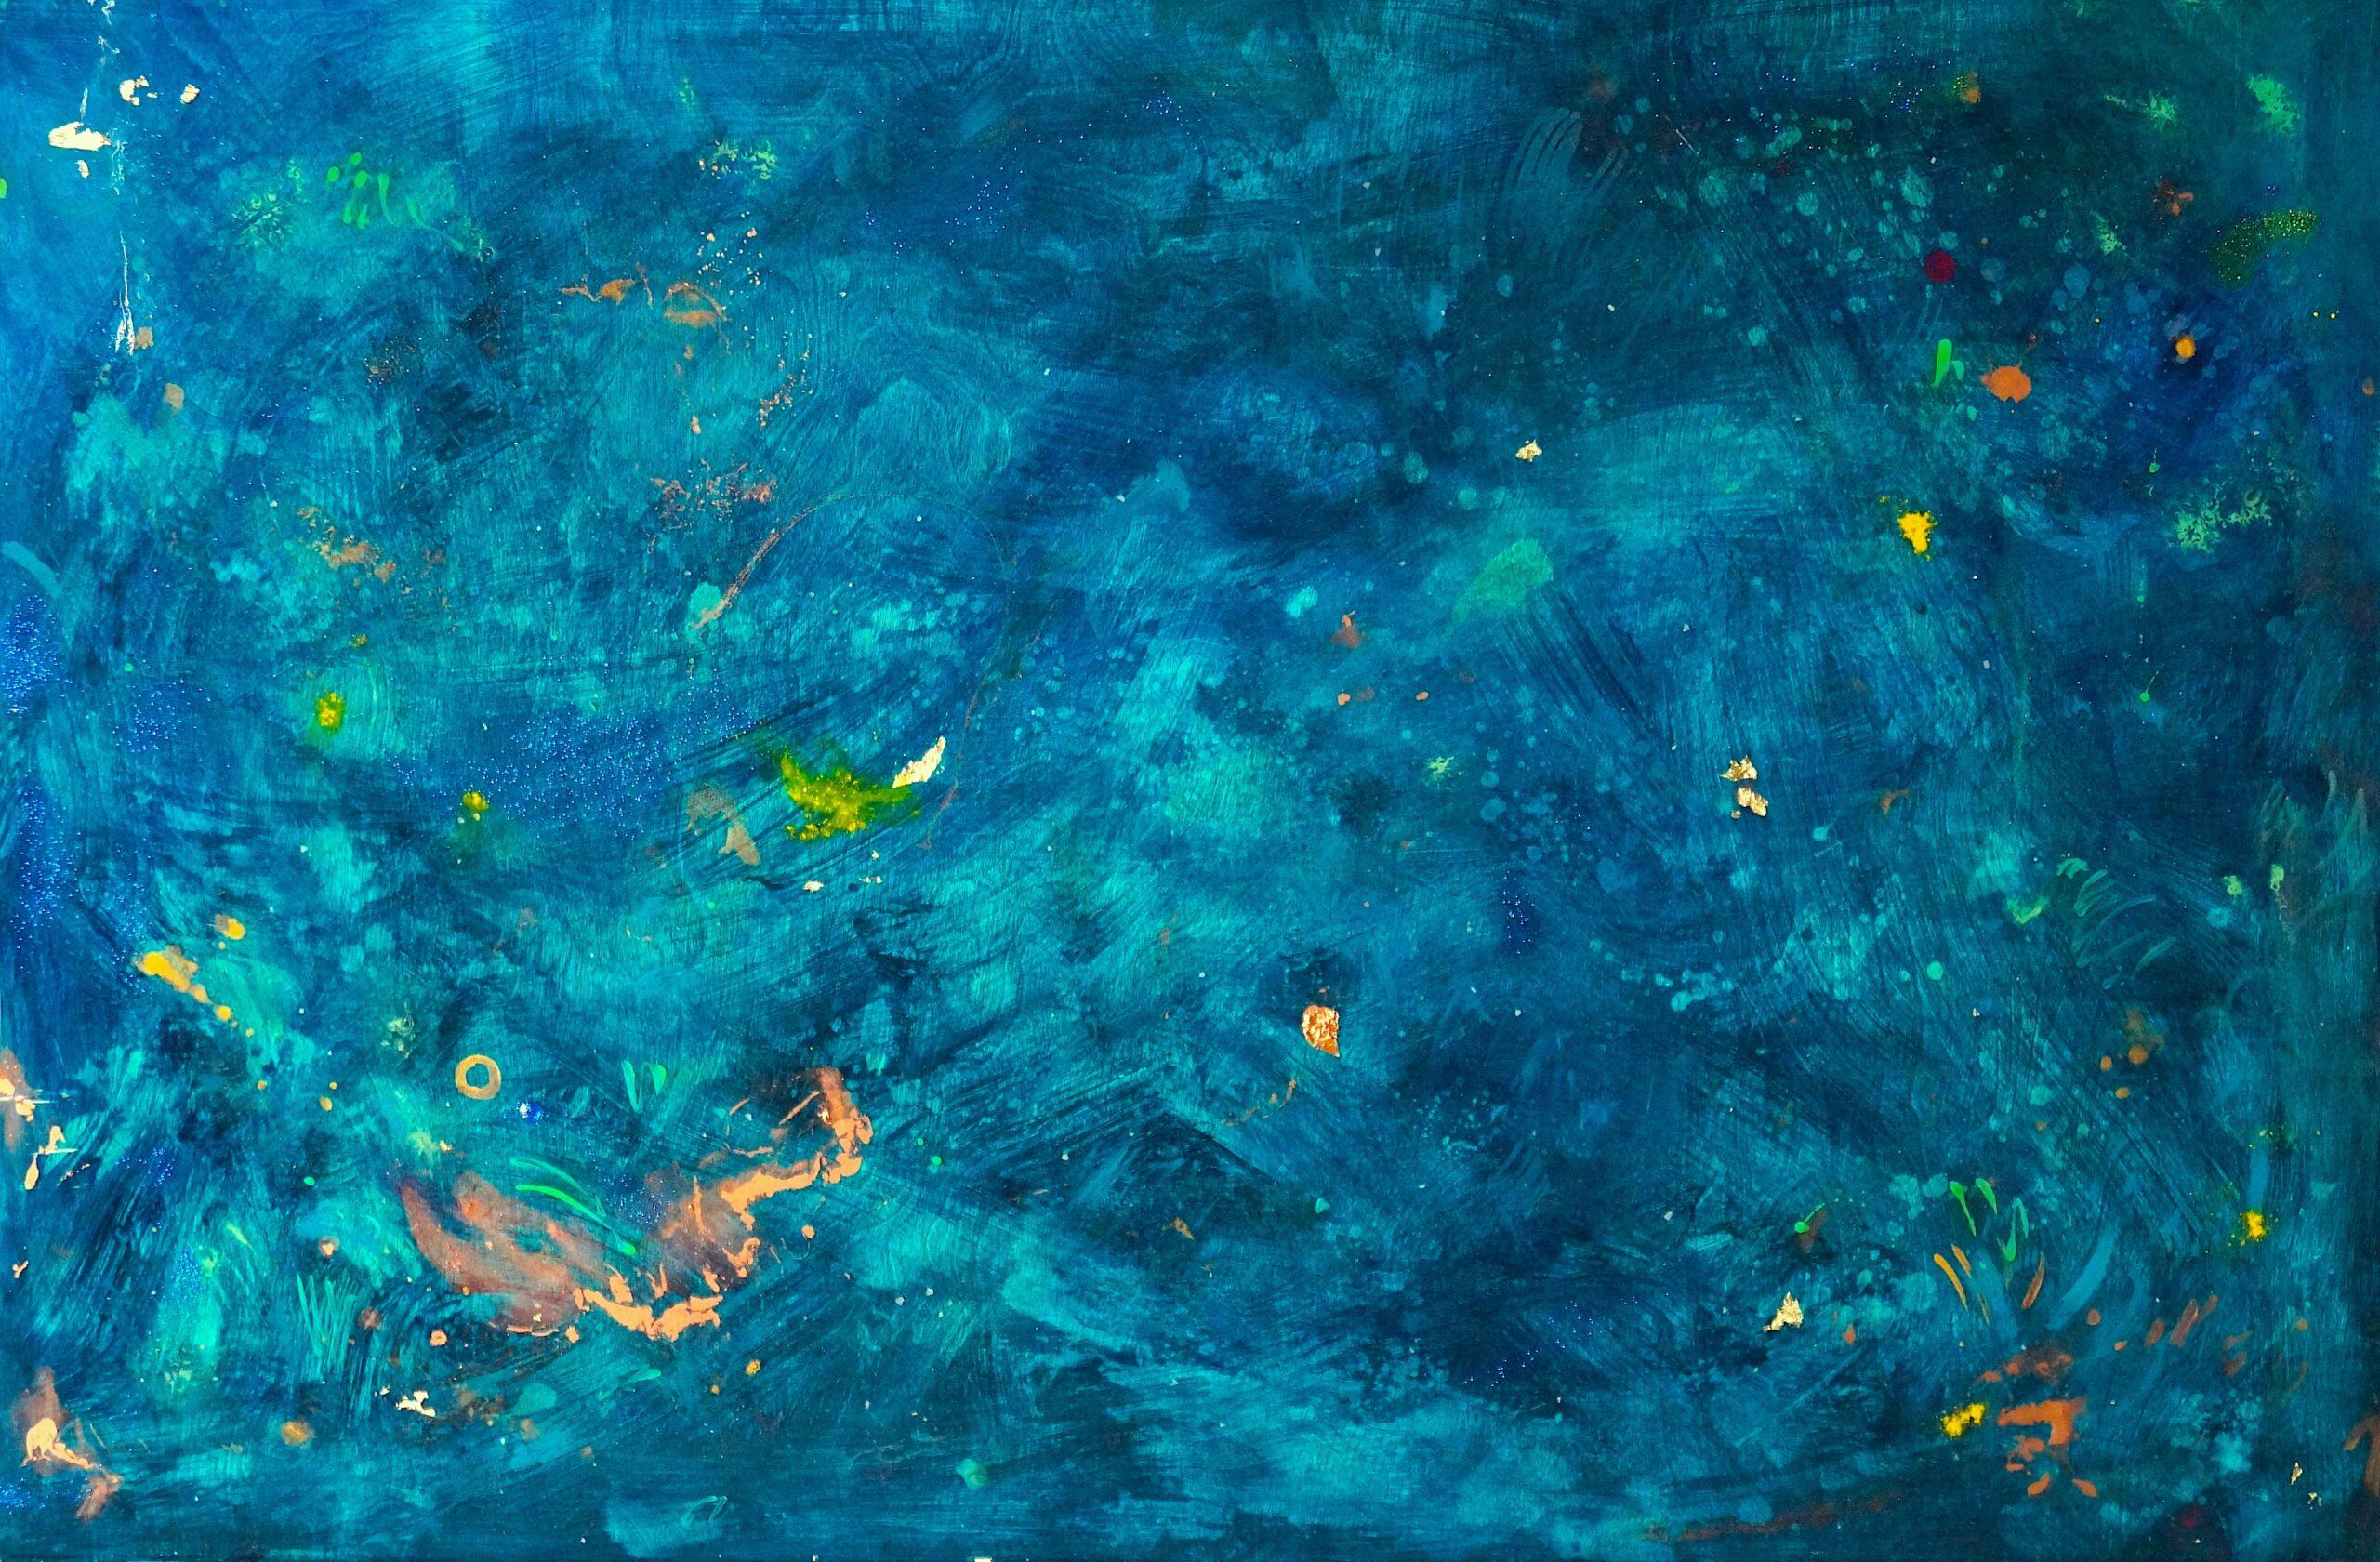 Submerged by Carolina Amigó - Painting by Unknown